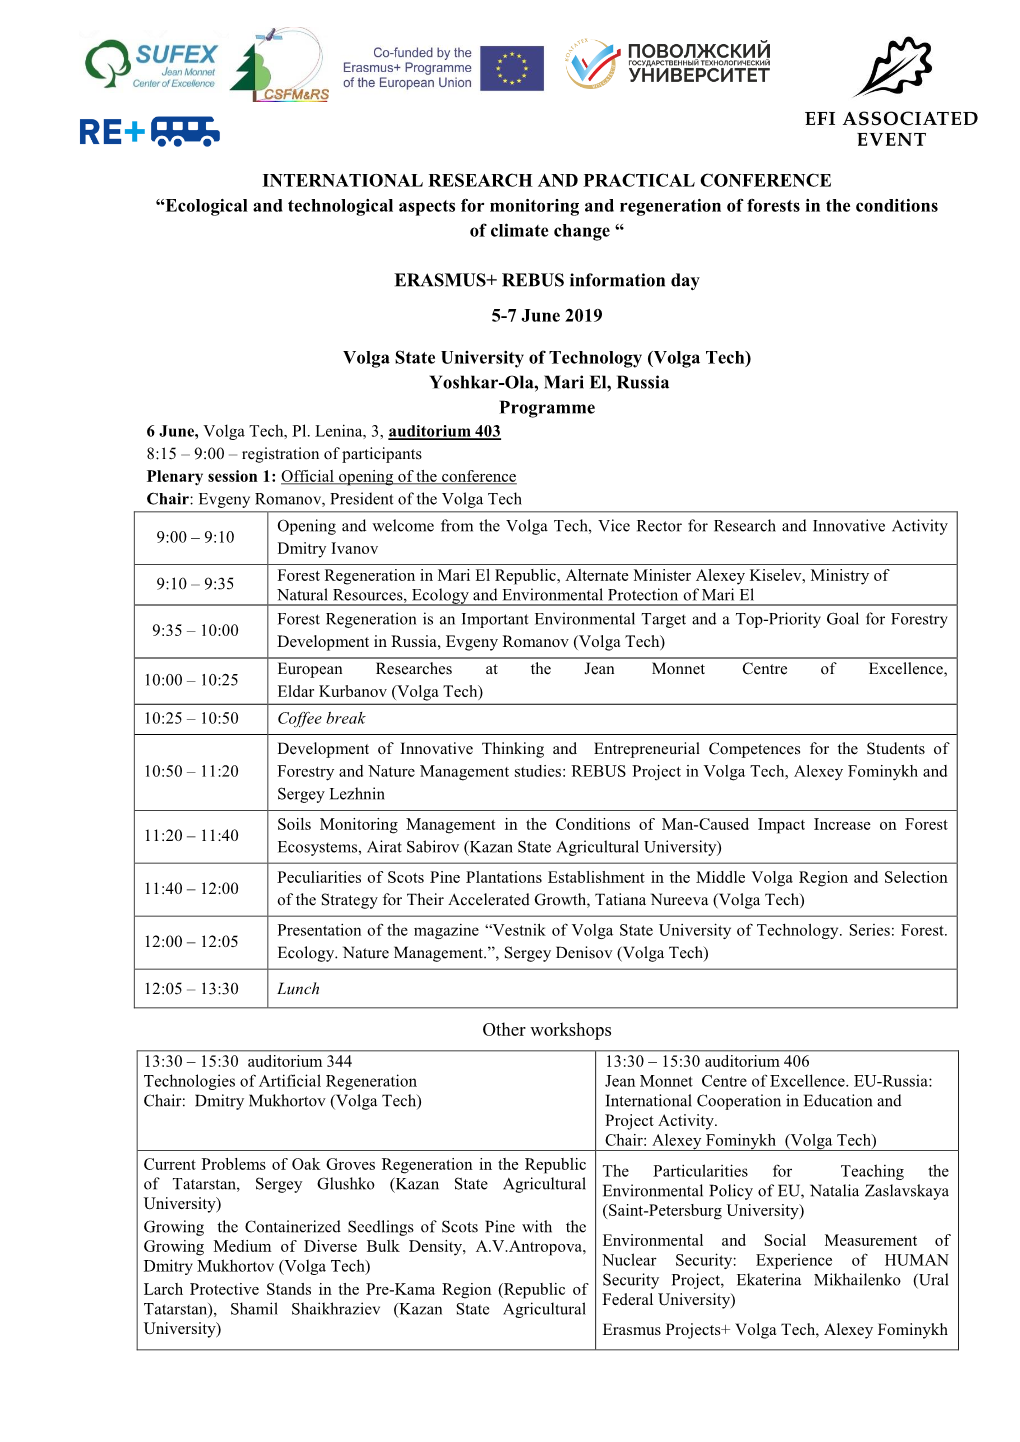 The Conference Programme